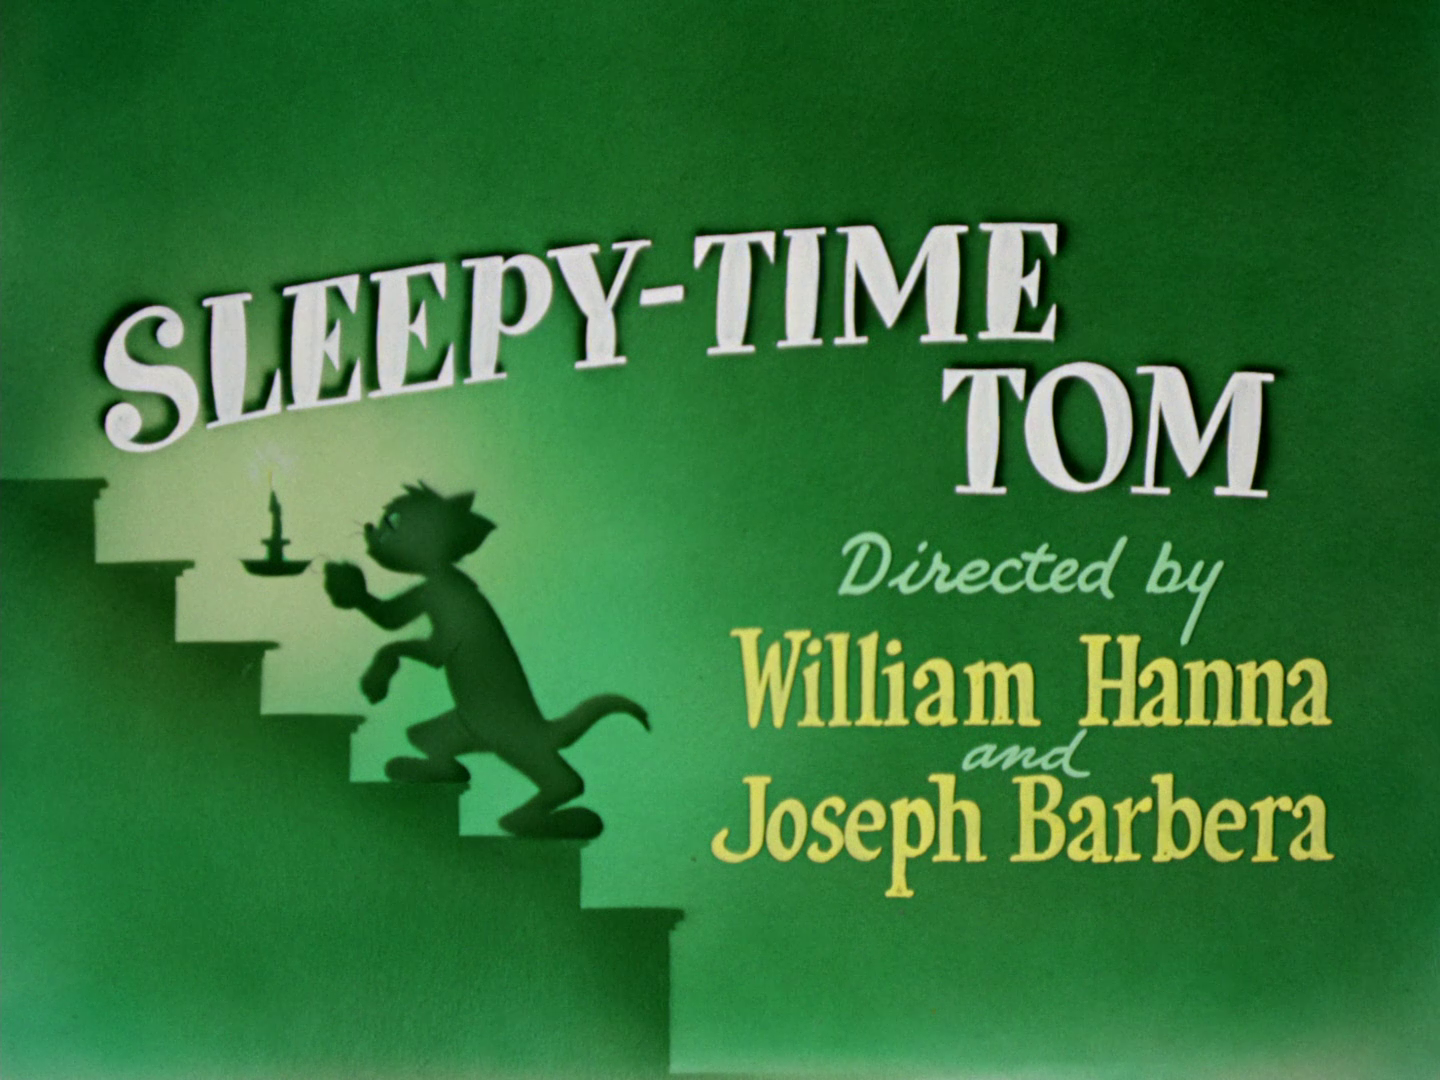 Тома 1951. Tom and Jerry 58 Episode Sleepy-time Tom 1951. Sleepy time Tom. Tom and Jerry 58 Episode Sleepy-time Tom. Tom and Jerry Sleepy time.